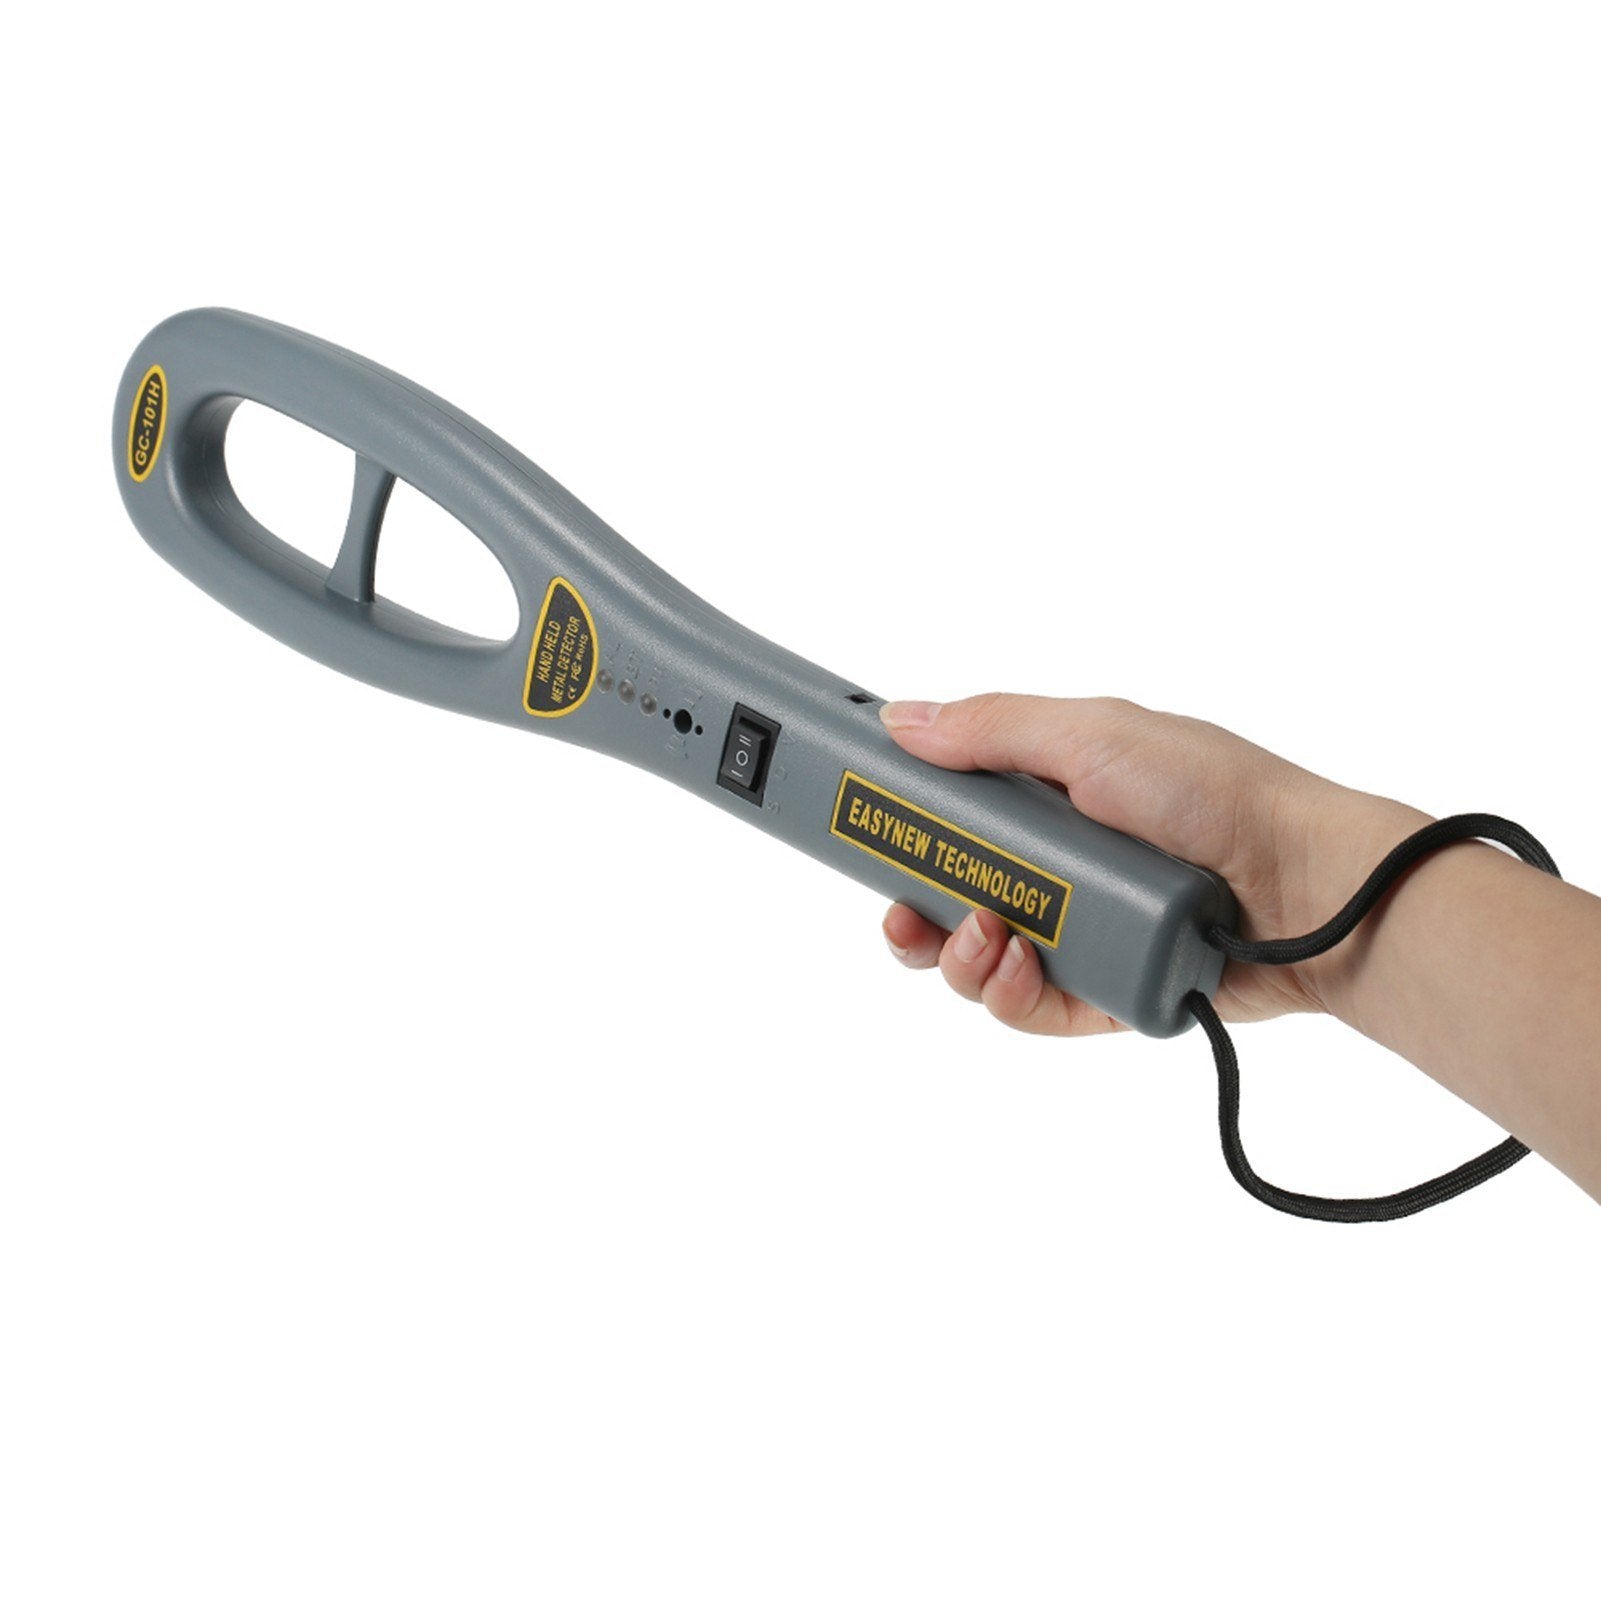 Portable Handheld Metal Detector High Sensitivity Safety Inspection With Buzzer Vibration for Security Check